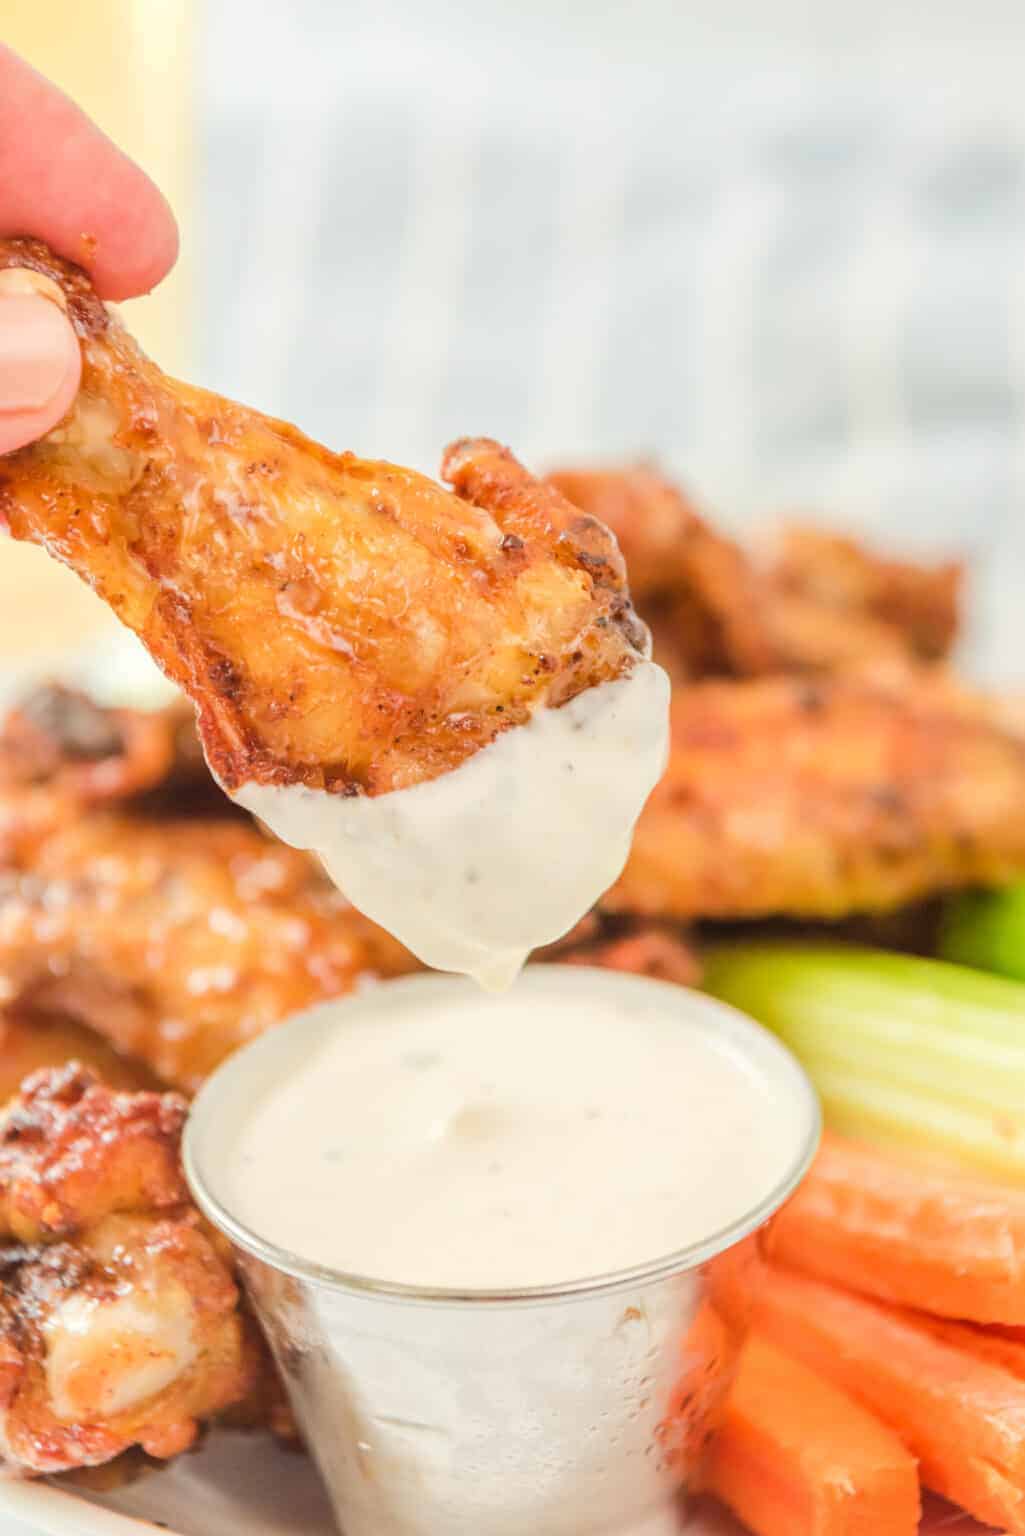 southern-style barbecue wings